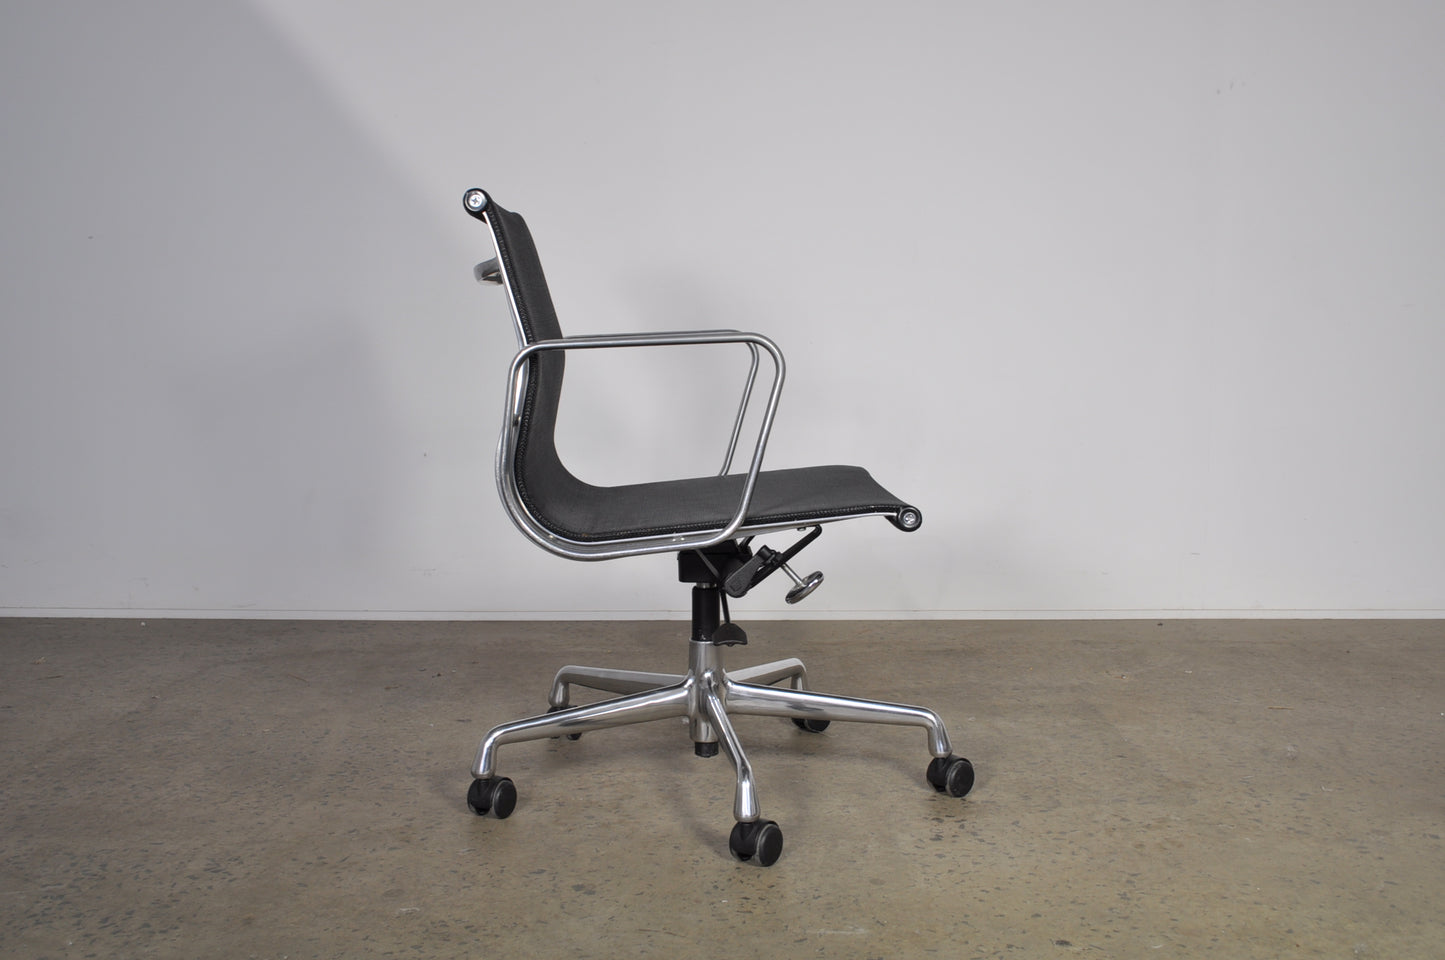 Vitra office chair.